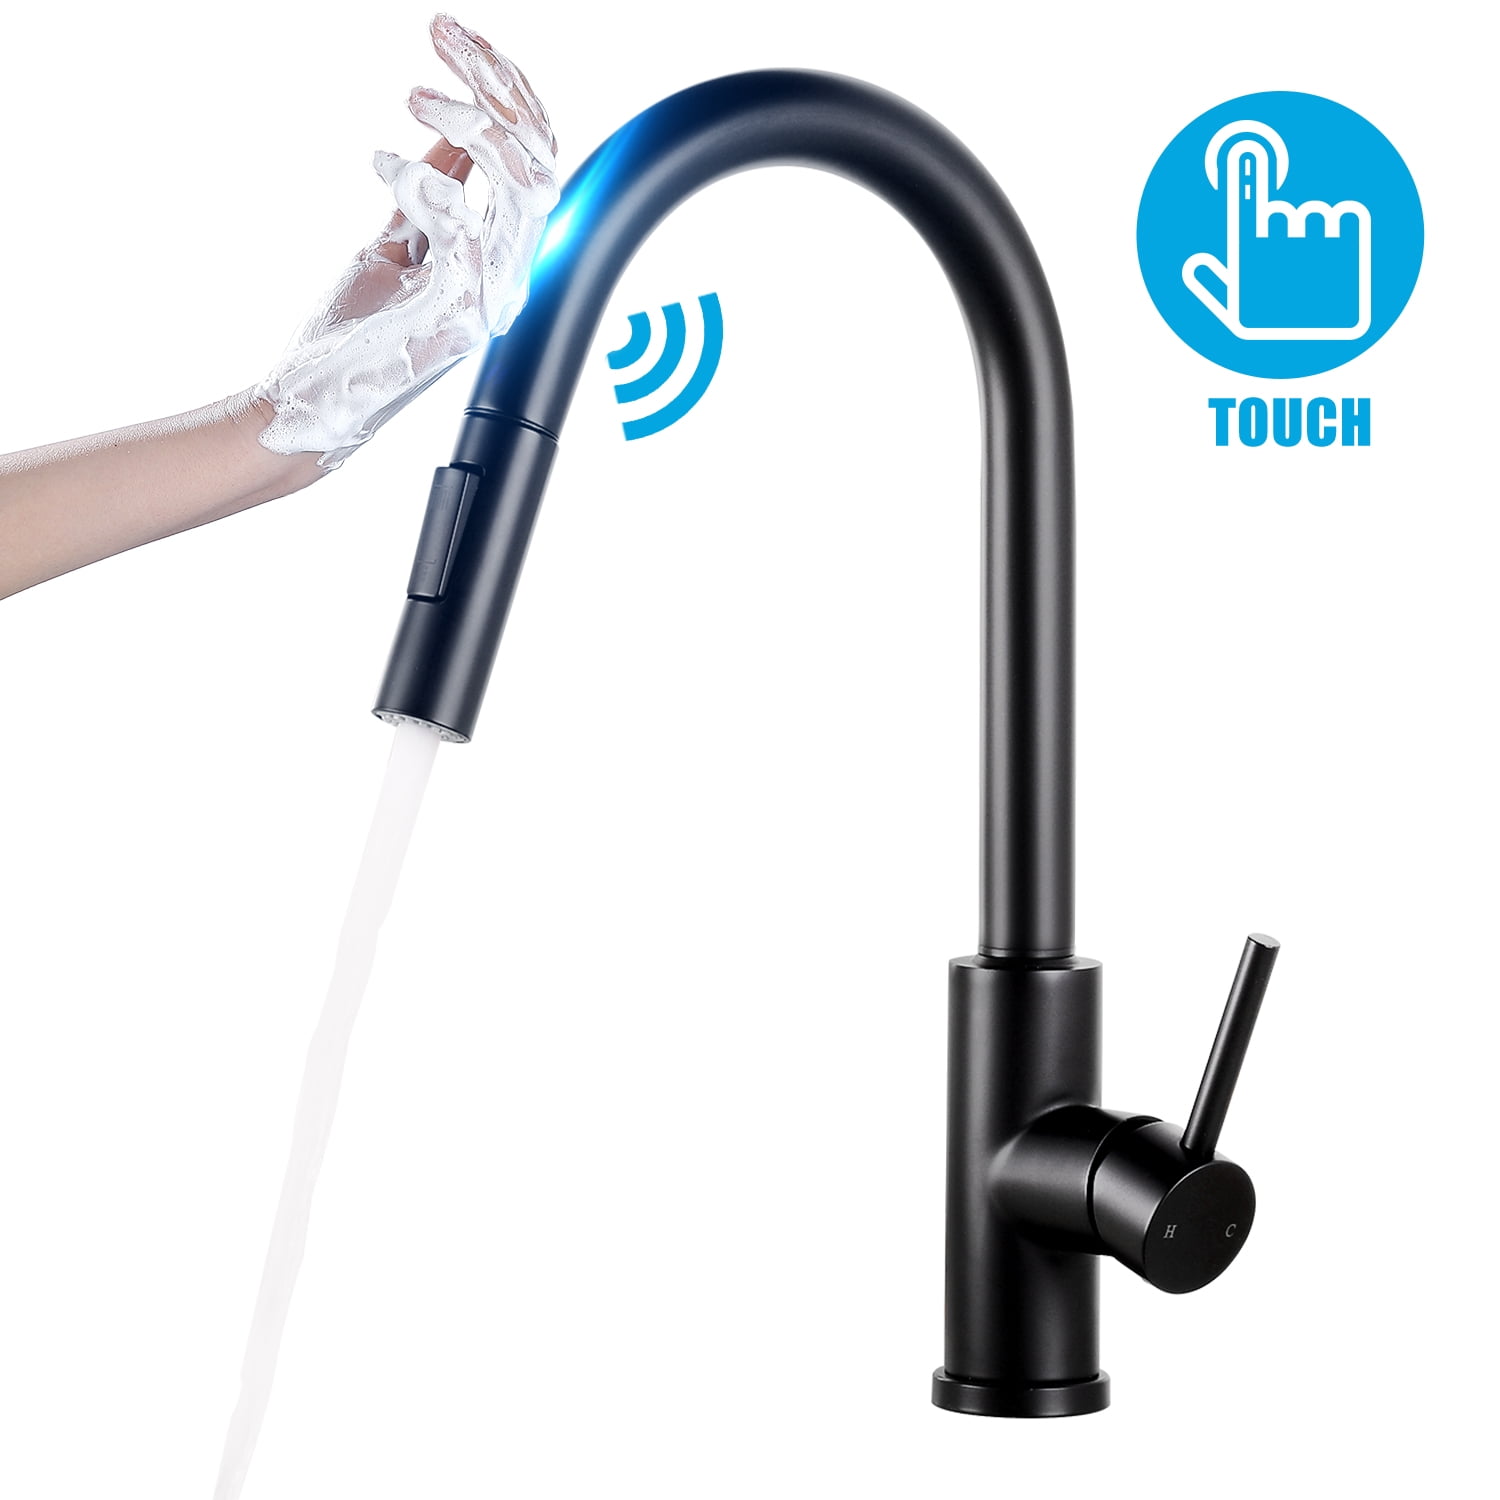 Fingerprint Resistant 304 Stainless Steel Qomolangma Touch Sensor Brush Nickel Kitchen Faucets with Pull Down Sprayer Single Hole Deck Mount Single Handle Kitchen Sink Faucet with Pull Out Sprayer